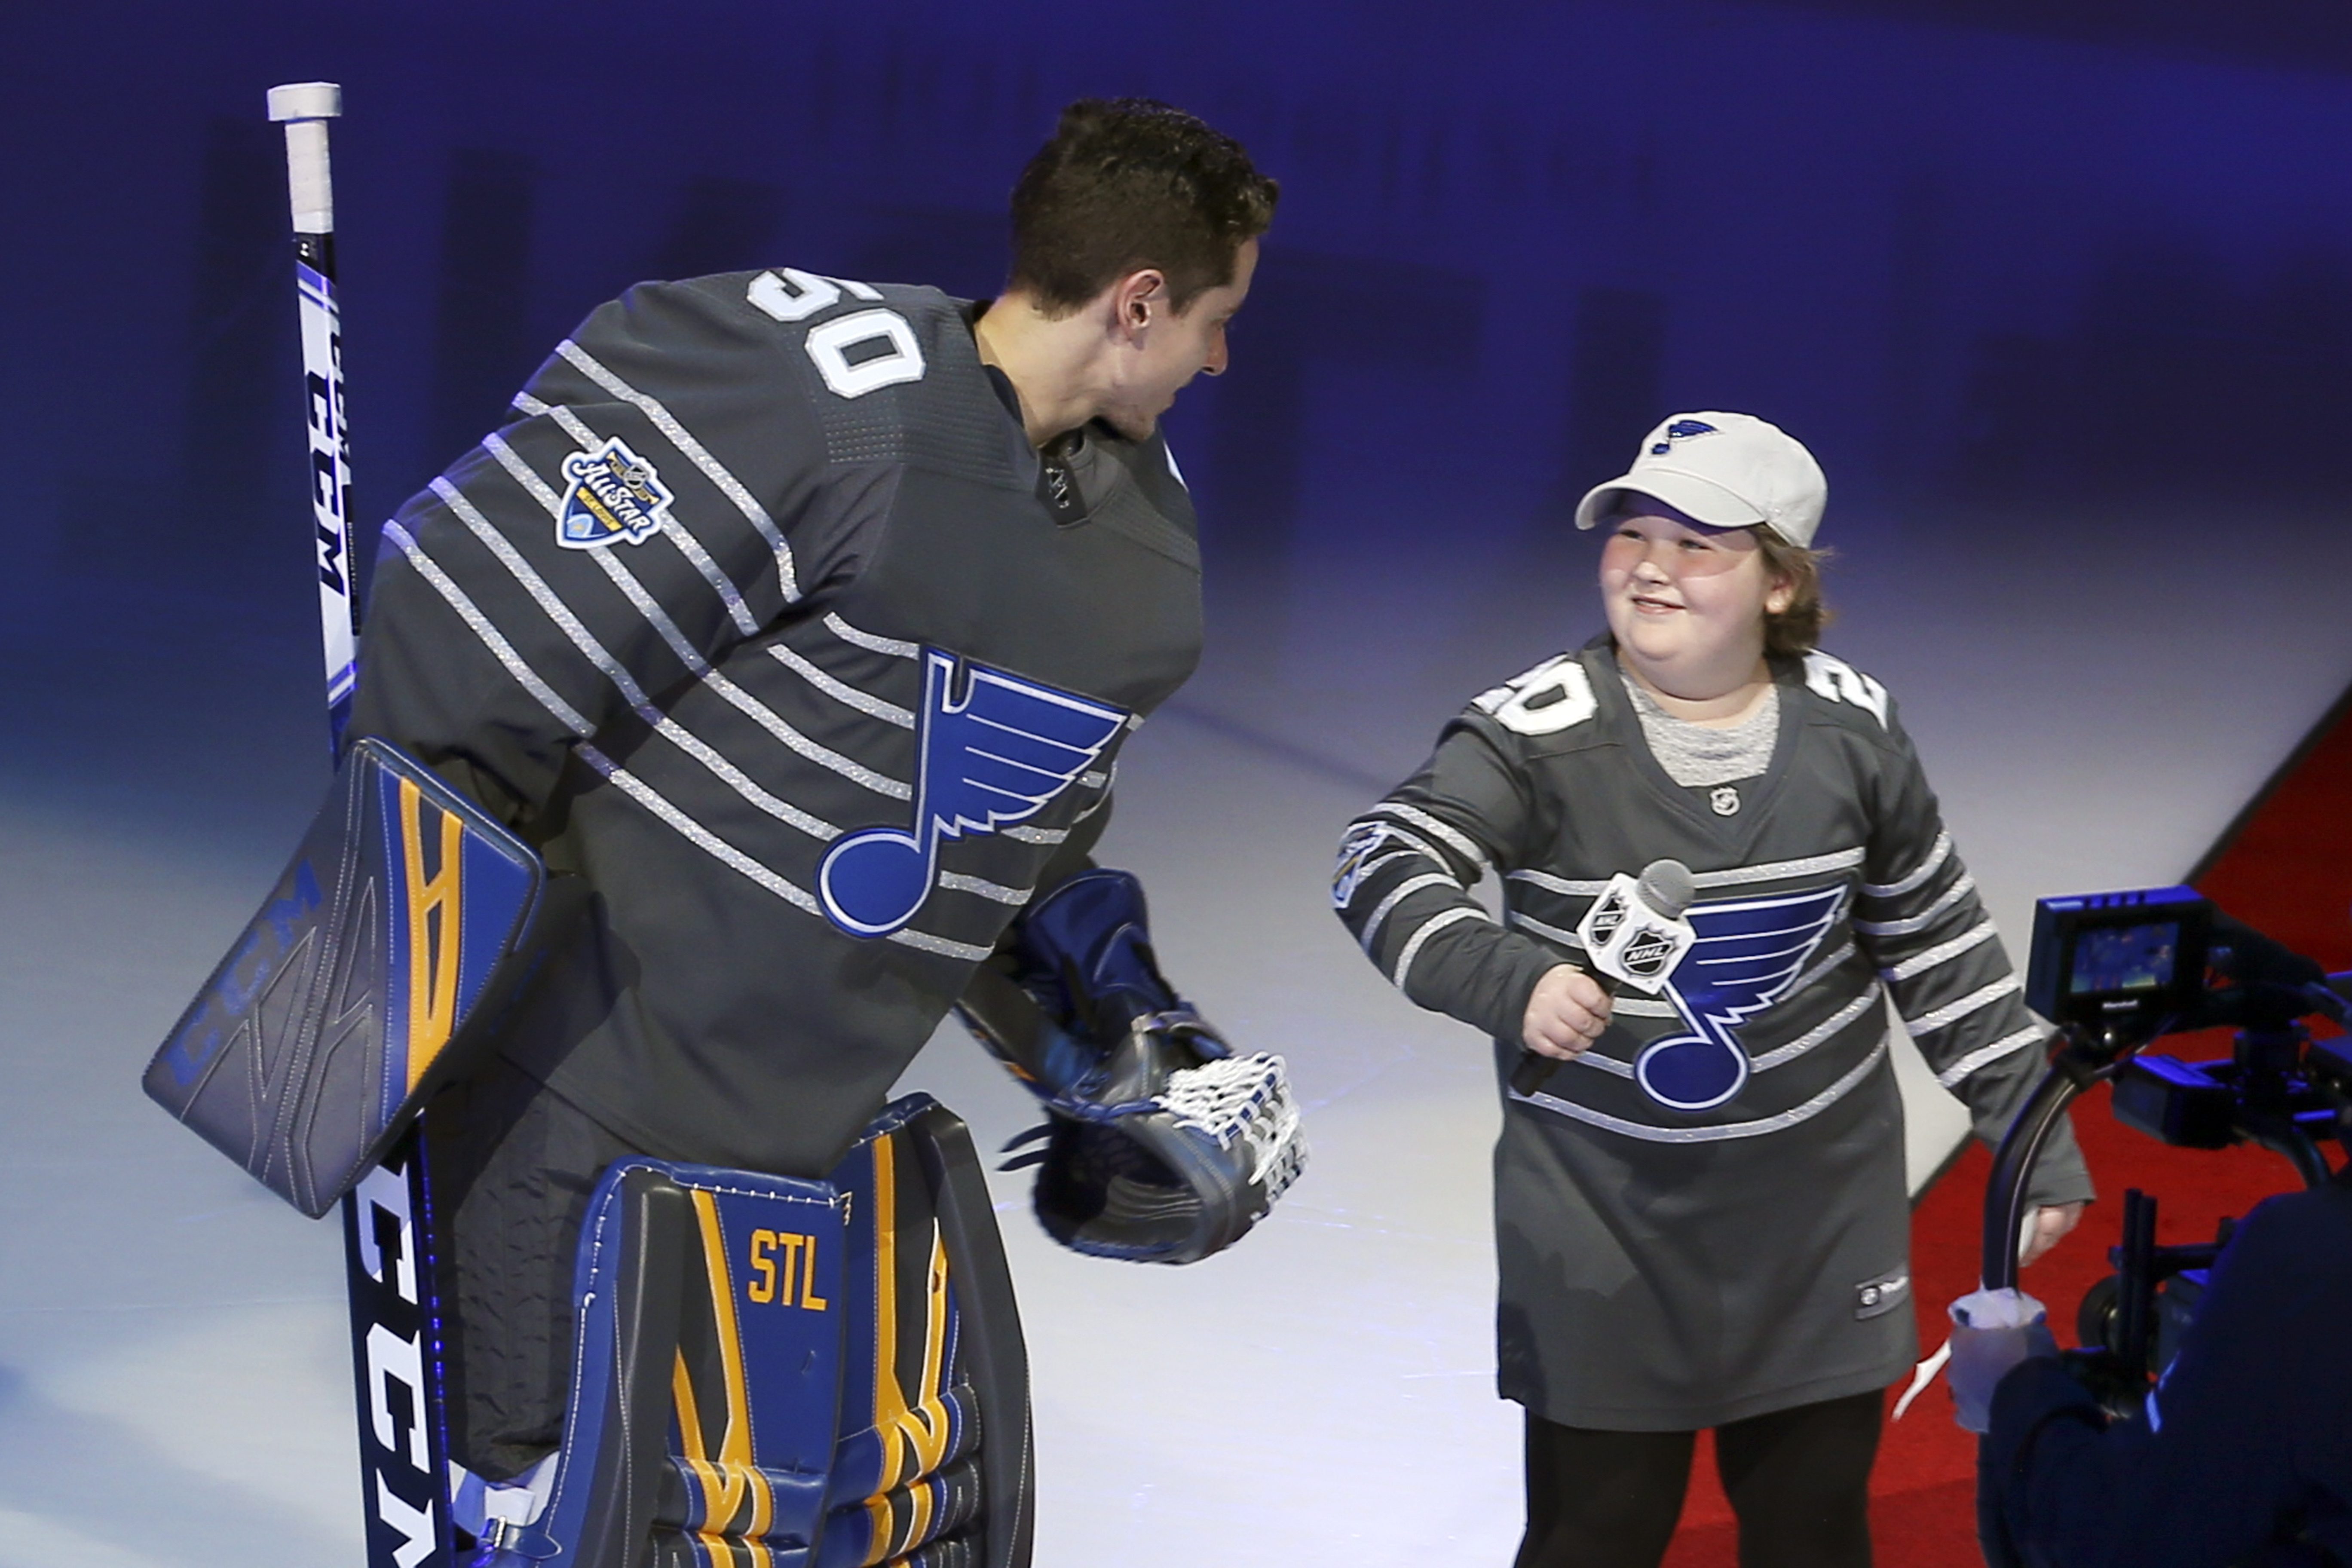 NHL All-Star festivities wrap up in St